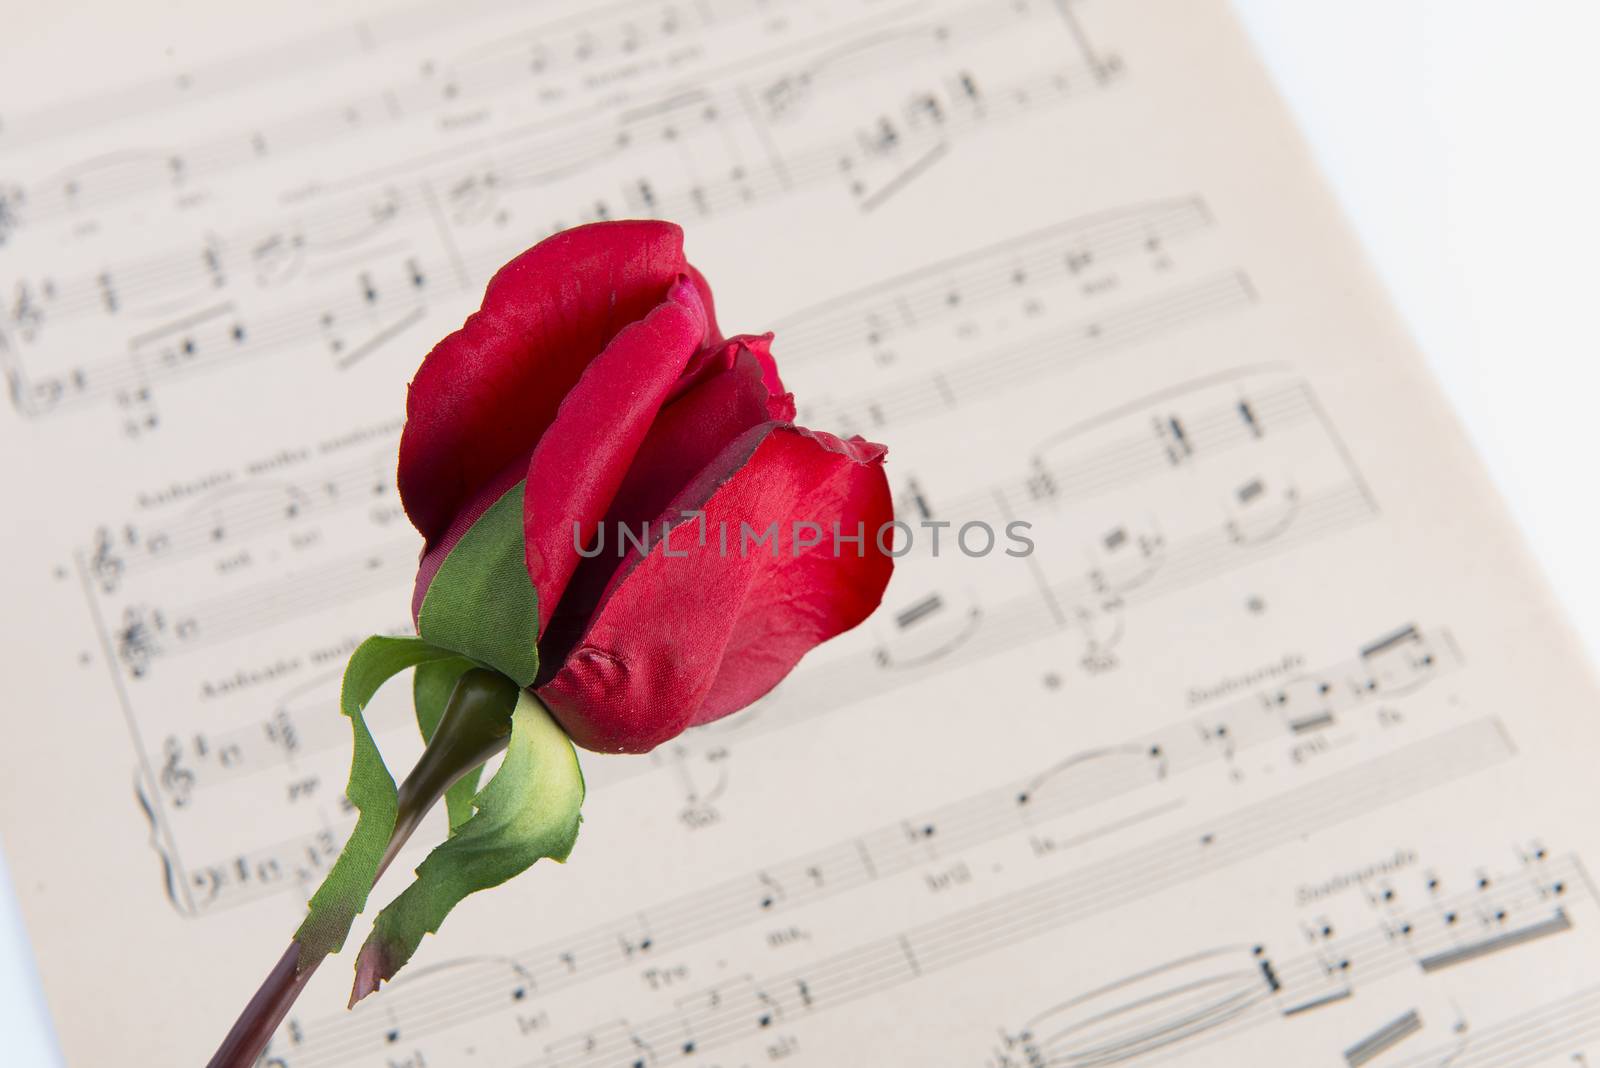 pages of the musical score with a red rose